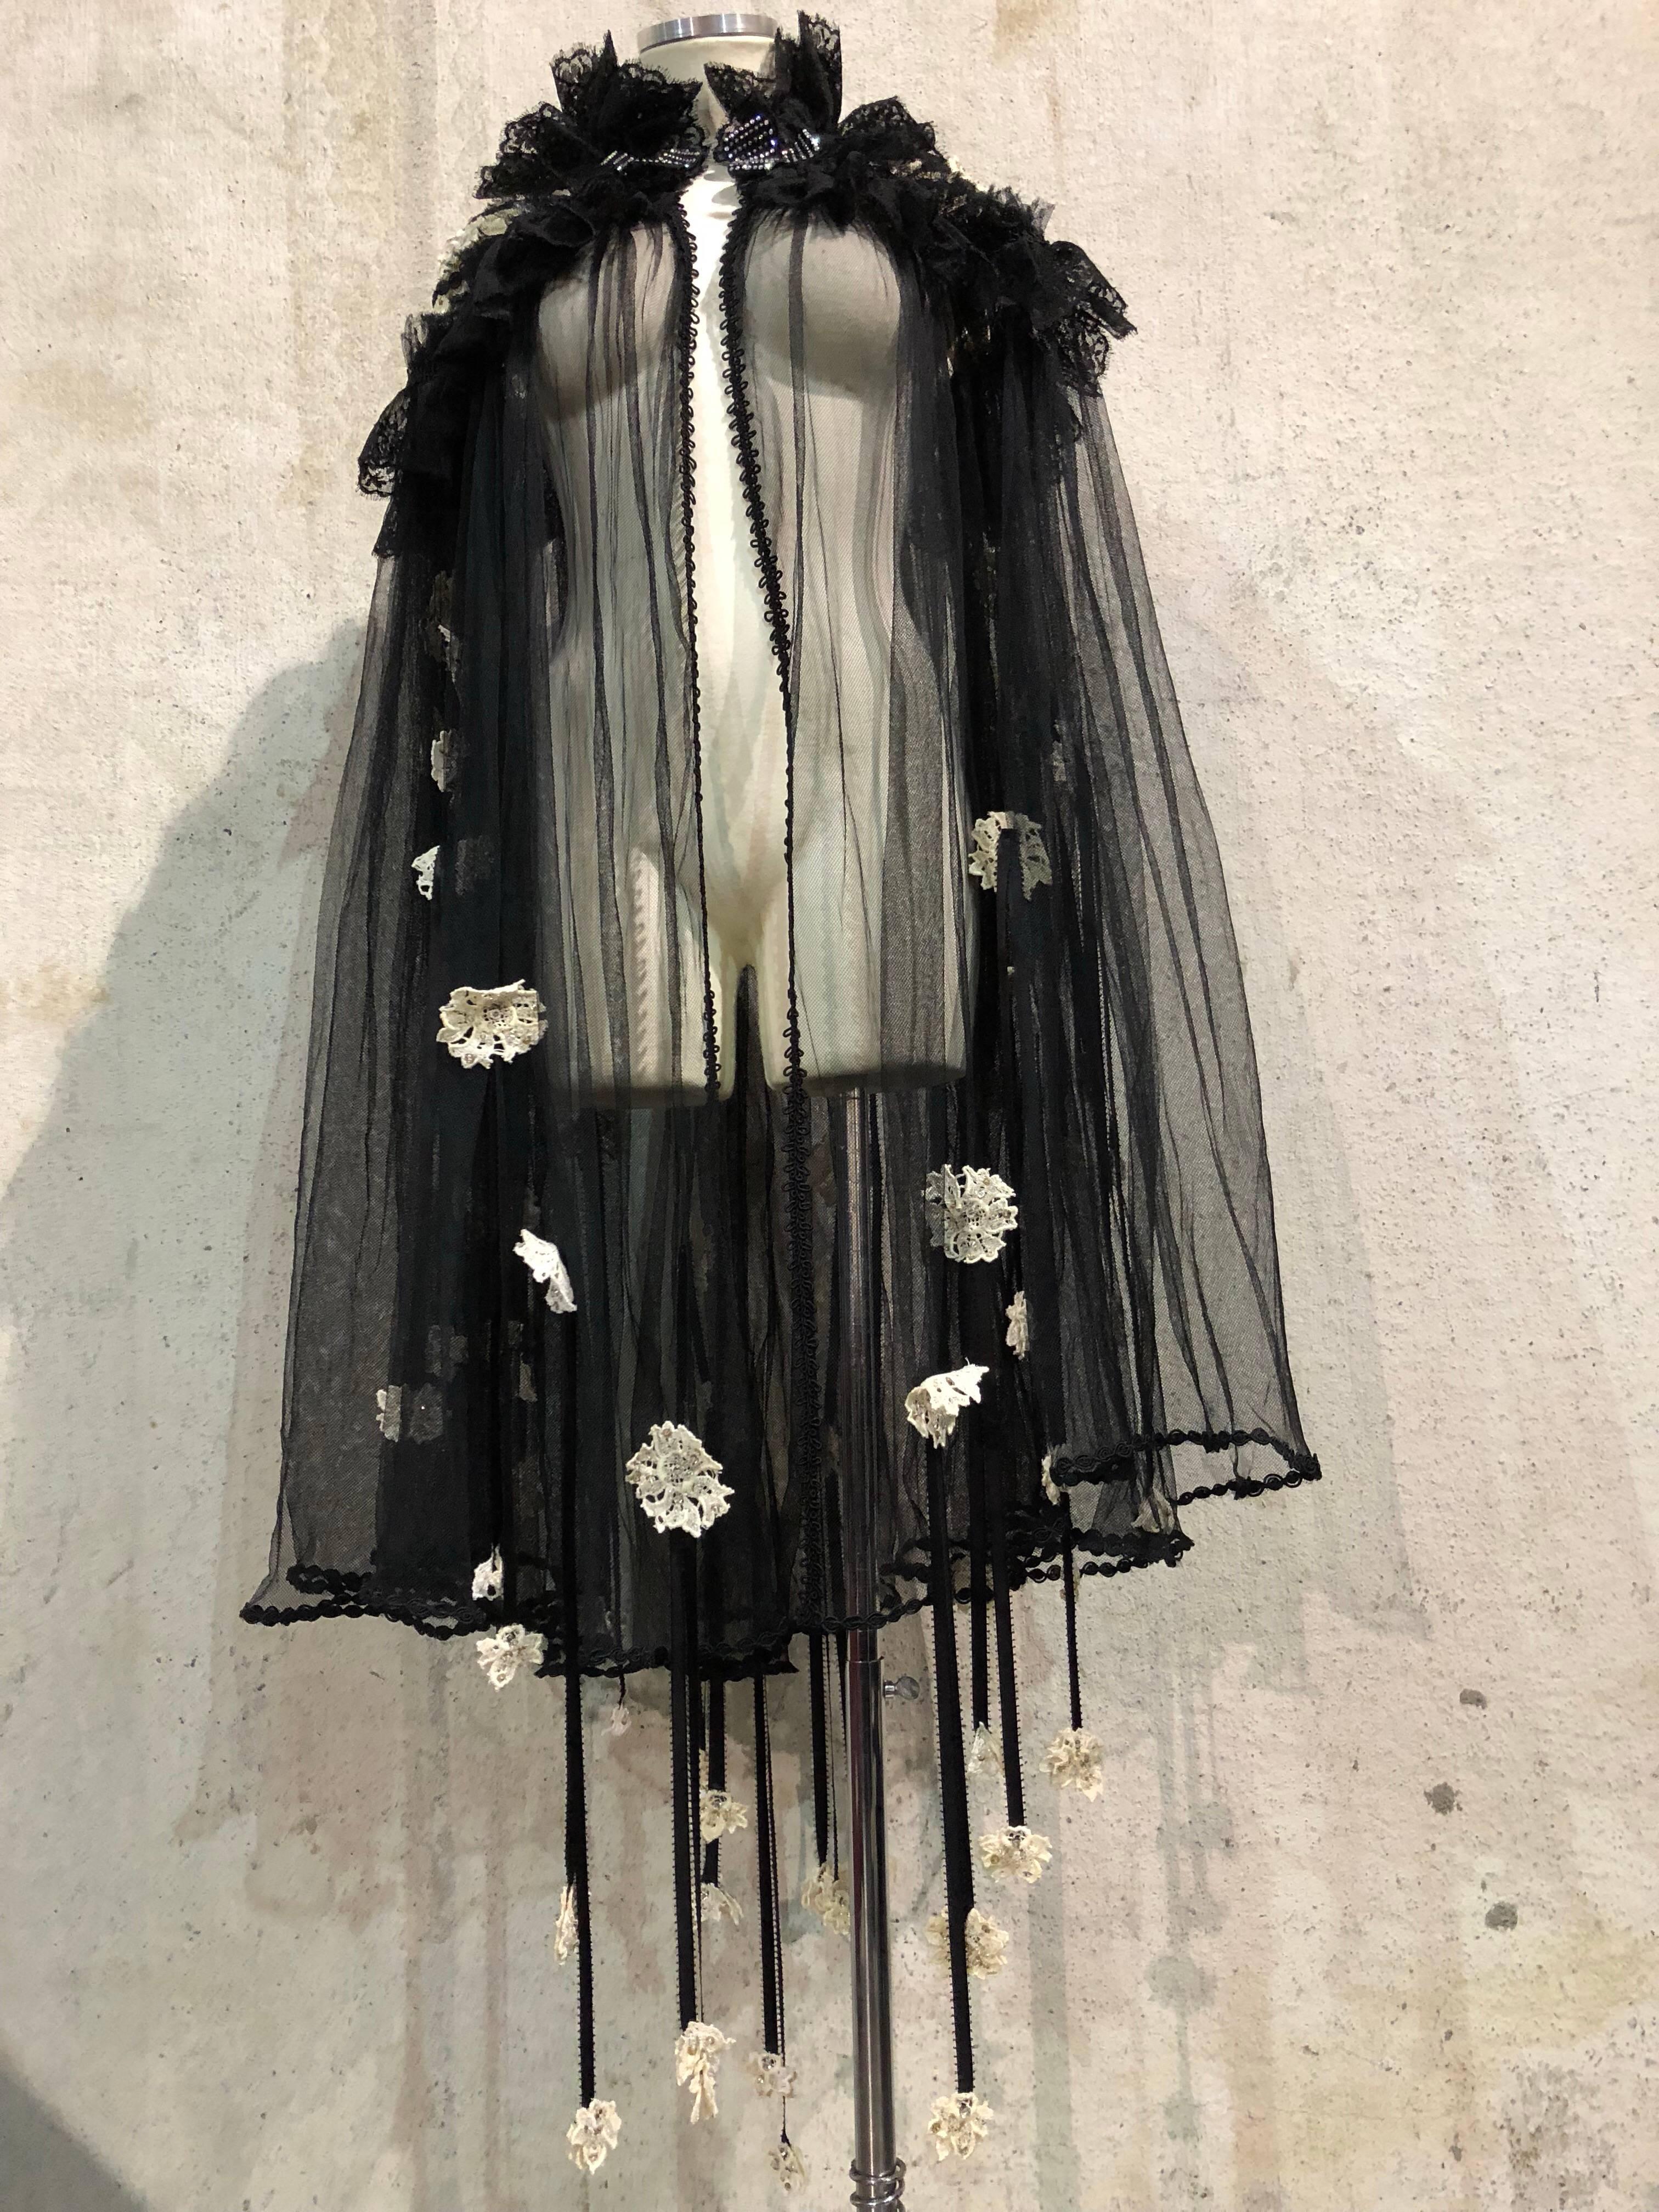 Custom-made 1940s-style black net cape with cotton beaded lace flower applique.  Full collar of black Chantilly lace and net.  Toggle closure at front neckline and cream eyelet details at shoulders. Full swing-cut cape with ribbon streamers